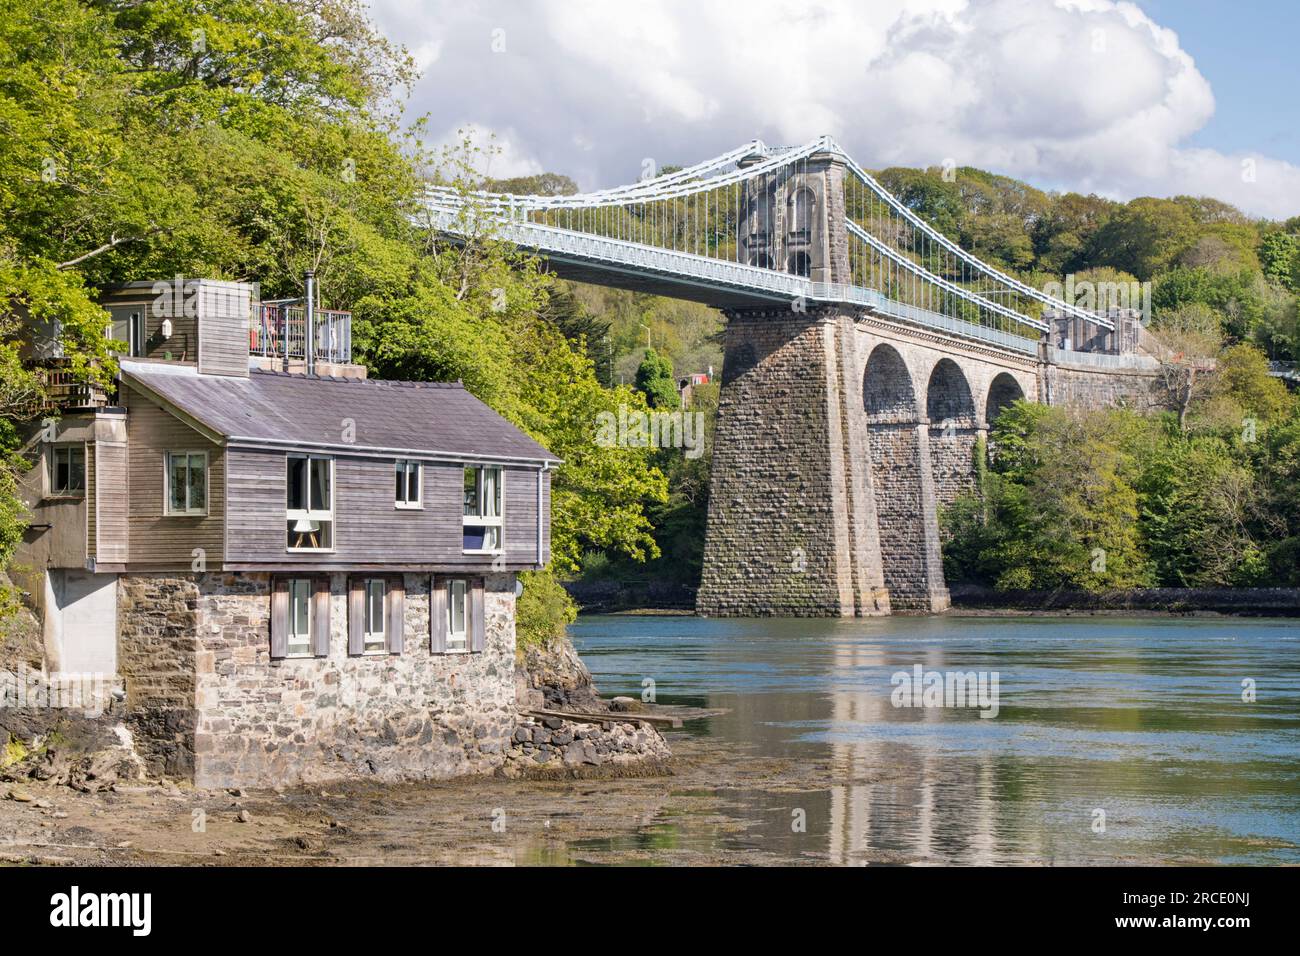 Menai Suspension Bridge crossing the Menai Strait from the Isle of Anglesey and the mainland of Wales. north-west Wales. UK Stock Photo